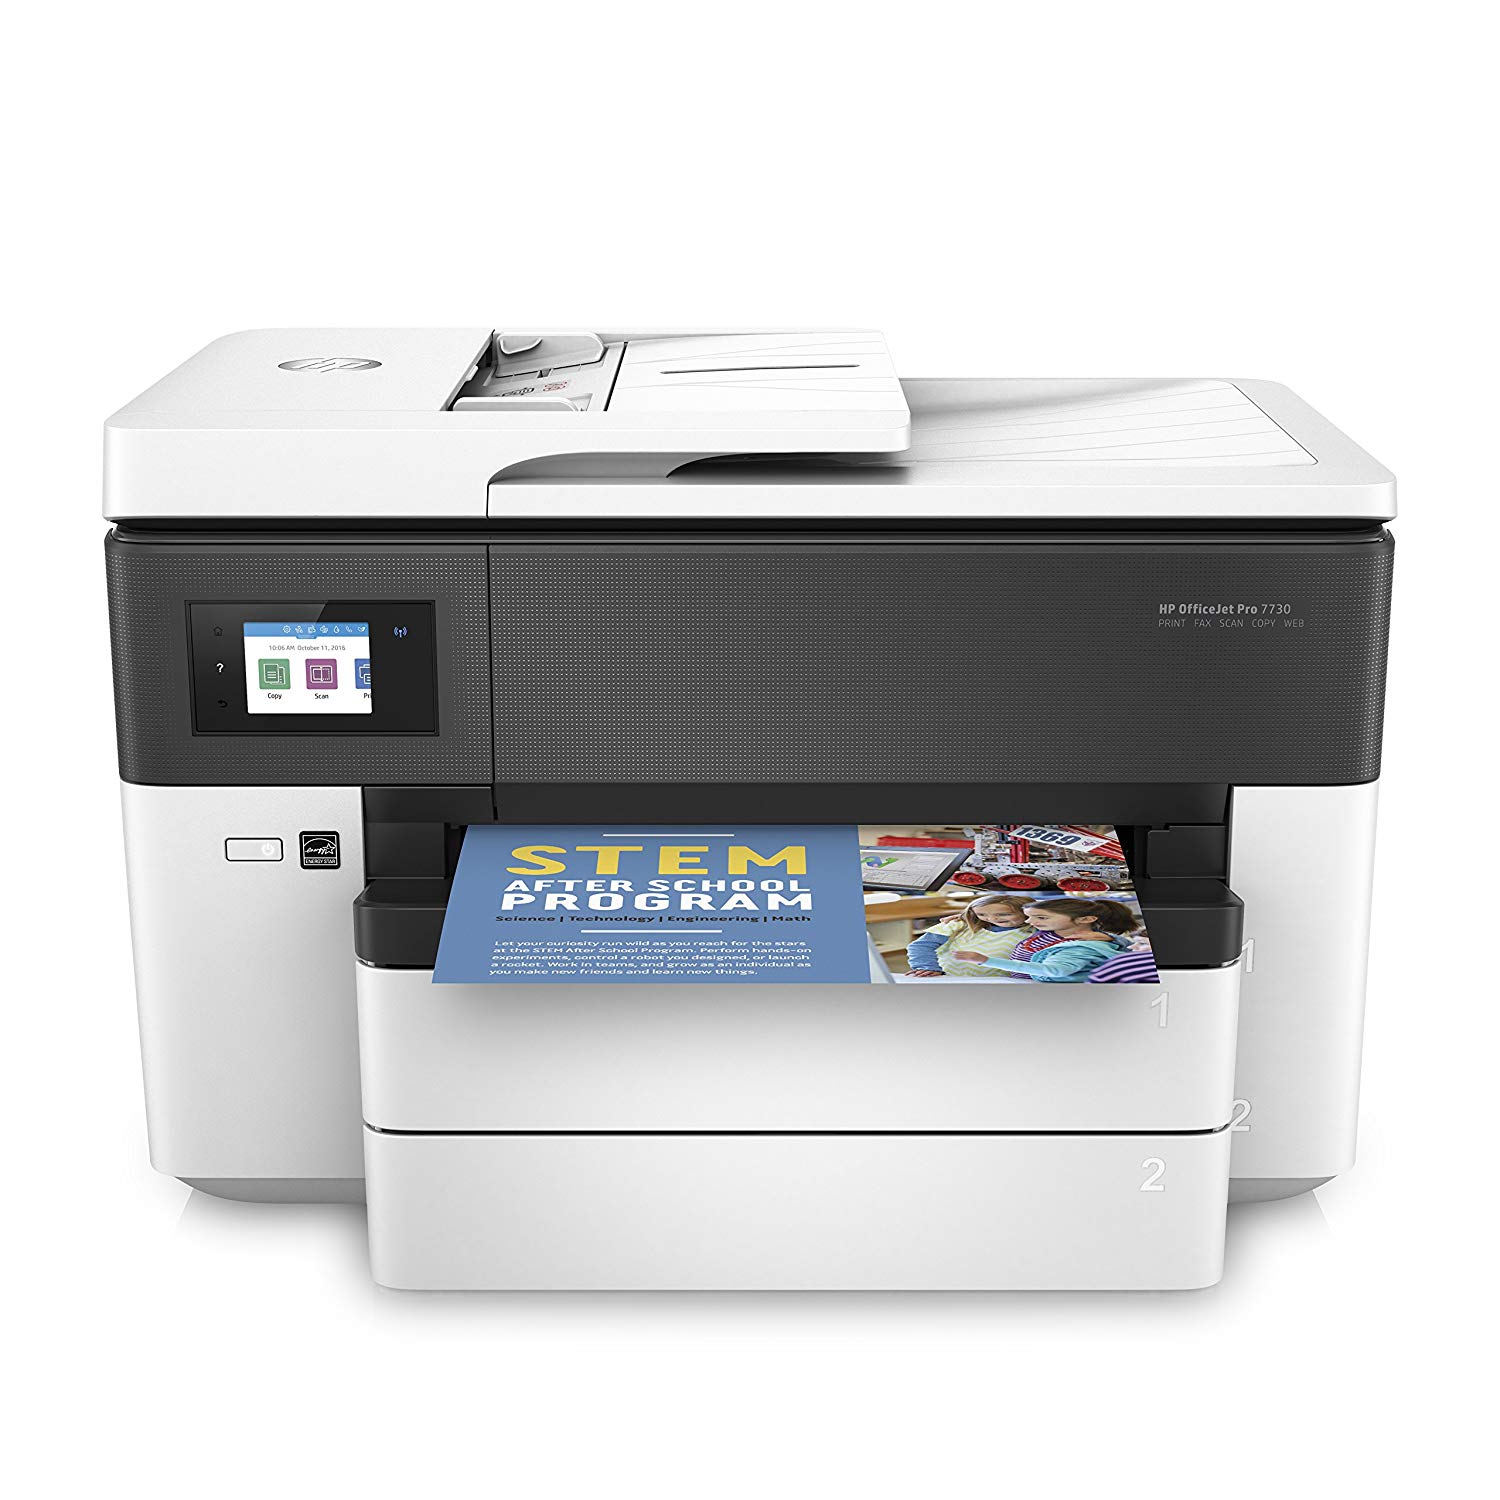 hp officejet pro 8600 driver for mac catalina